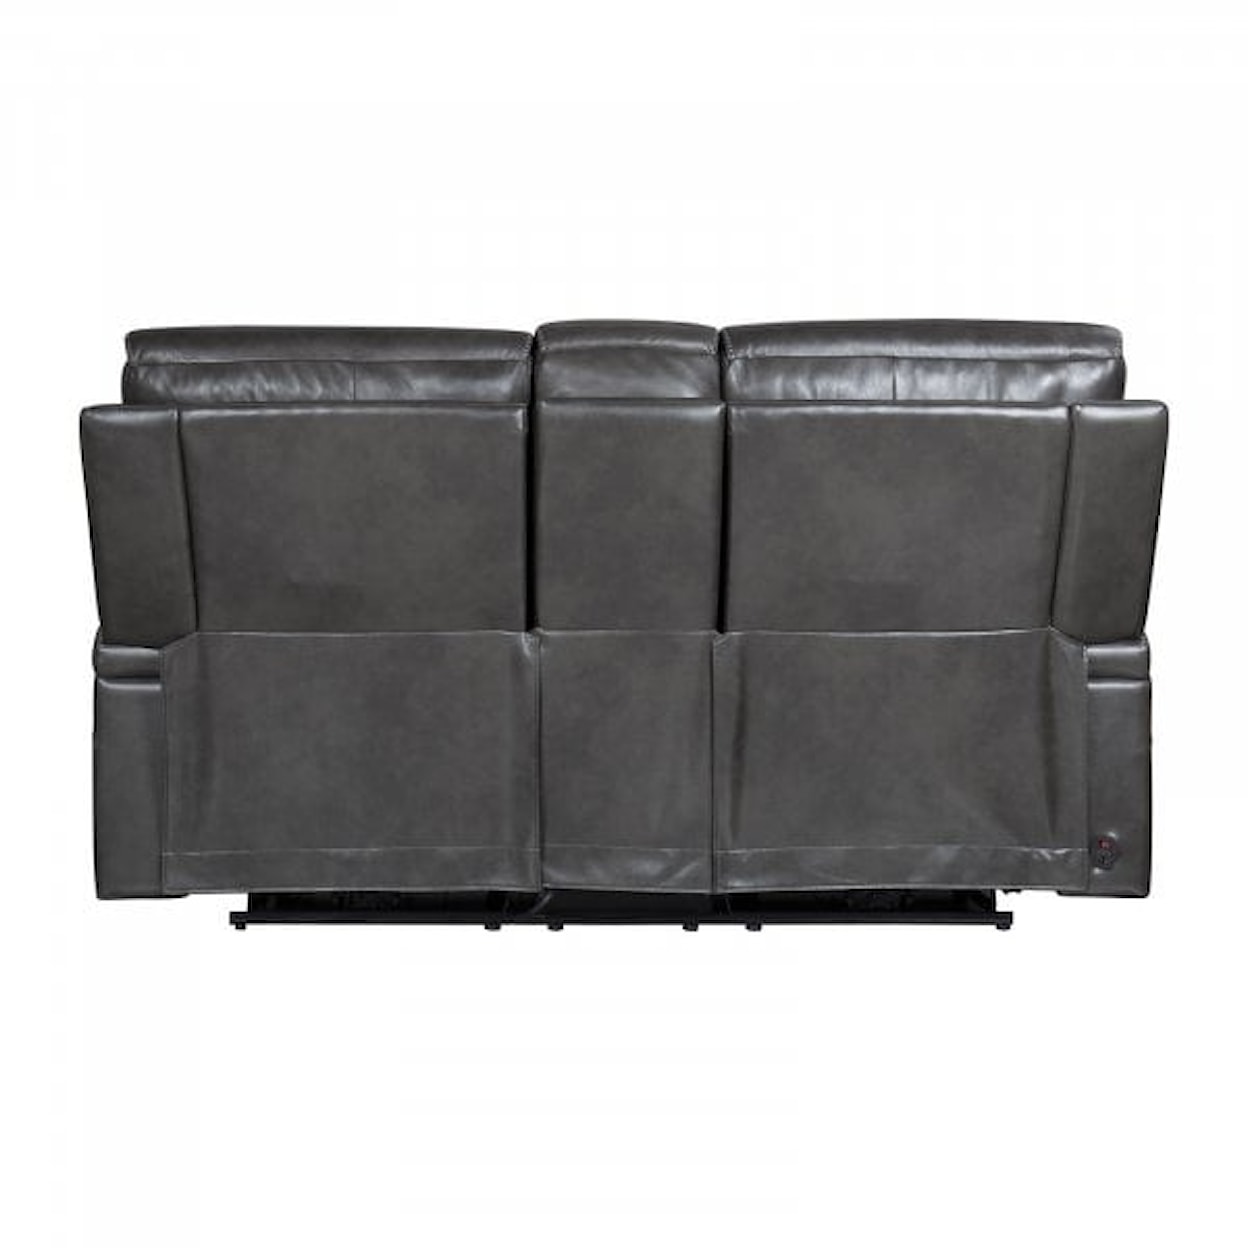 Barcalounger Glenwood Power Reclining Loveseat with Console